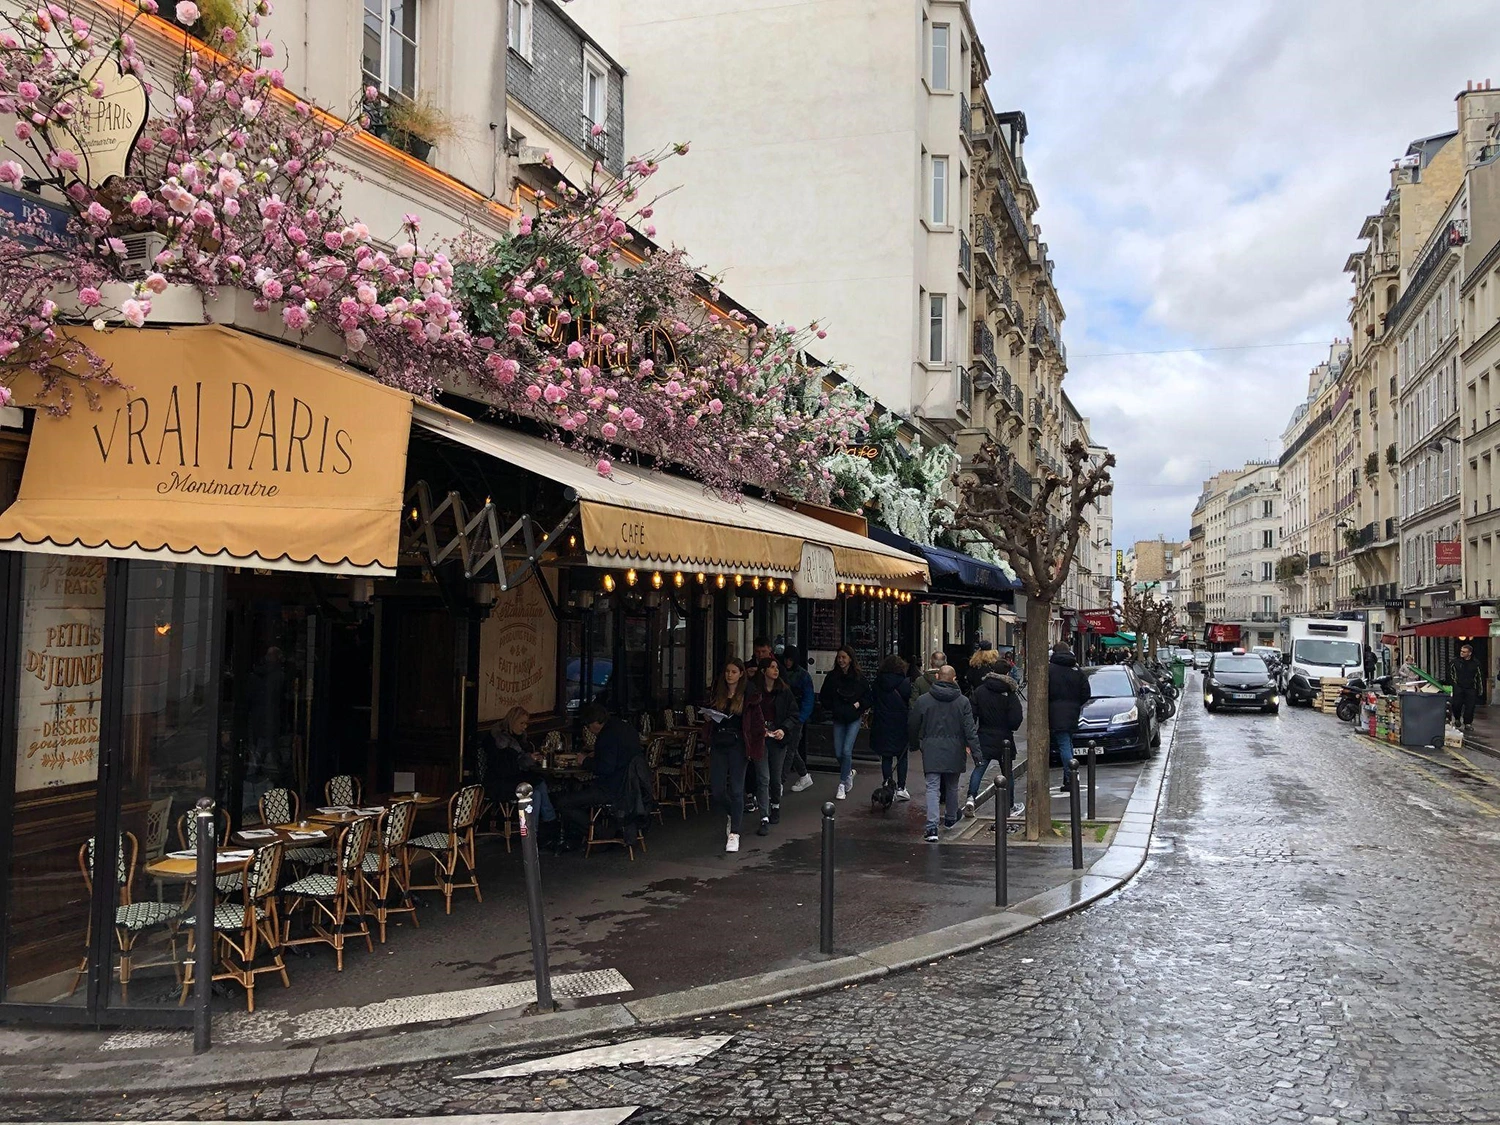 A wet street in Paris with a cafe on the corner; perhaps the chef created a seasonal menu that reflects the latest food trends.